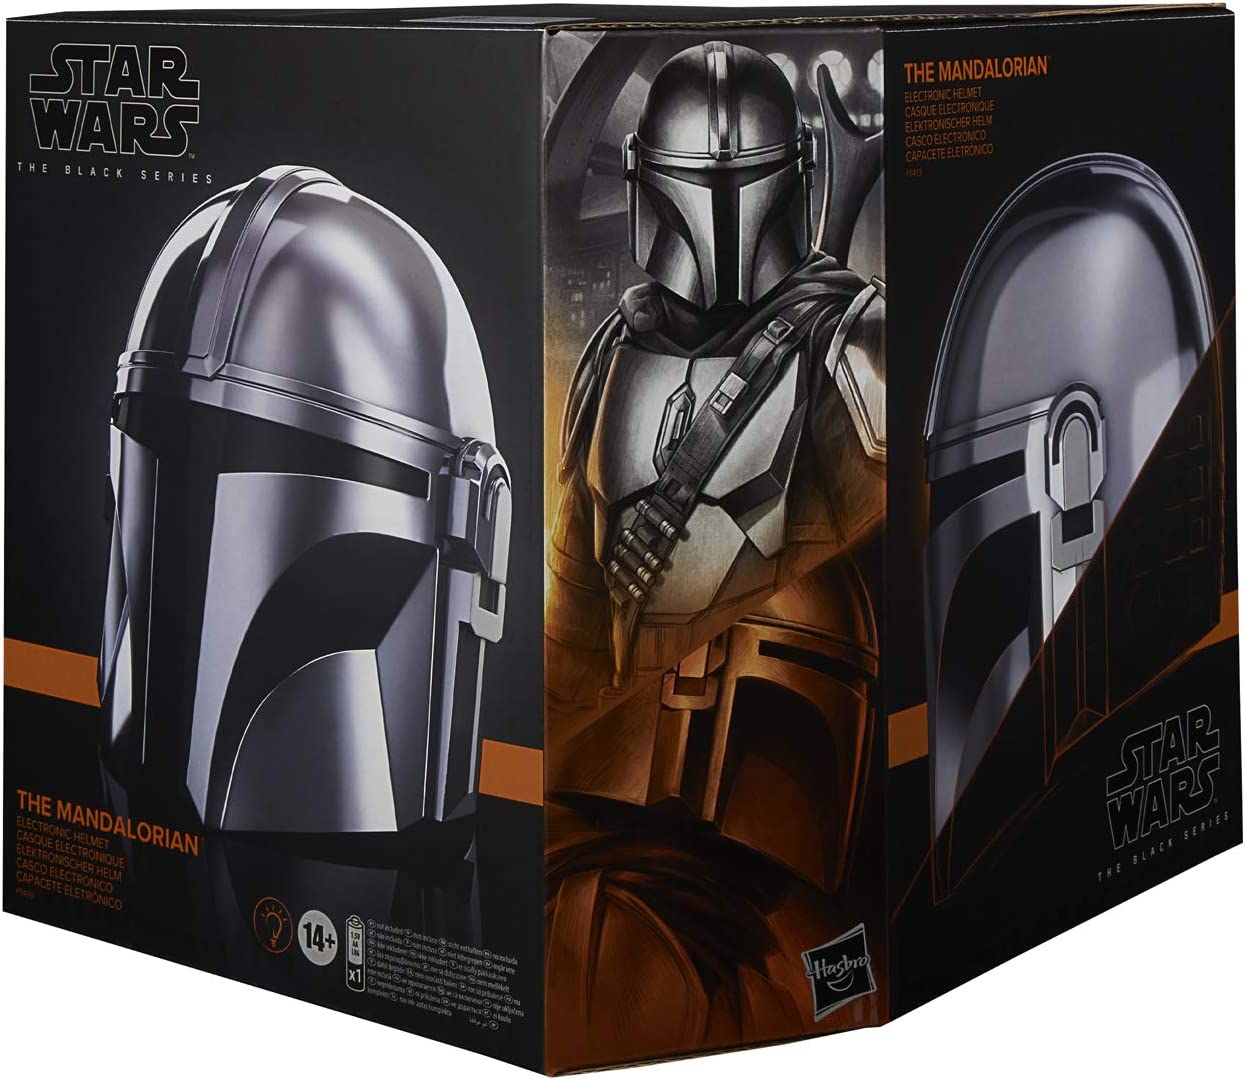 Star Wars: The Black Series - The Mandalorian electronic helmet - The Fourth Place